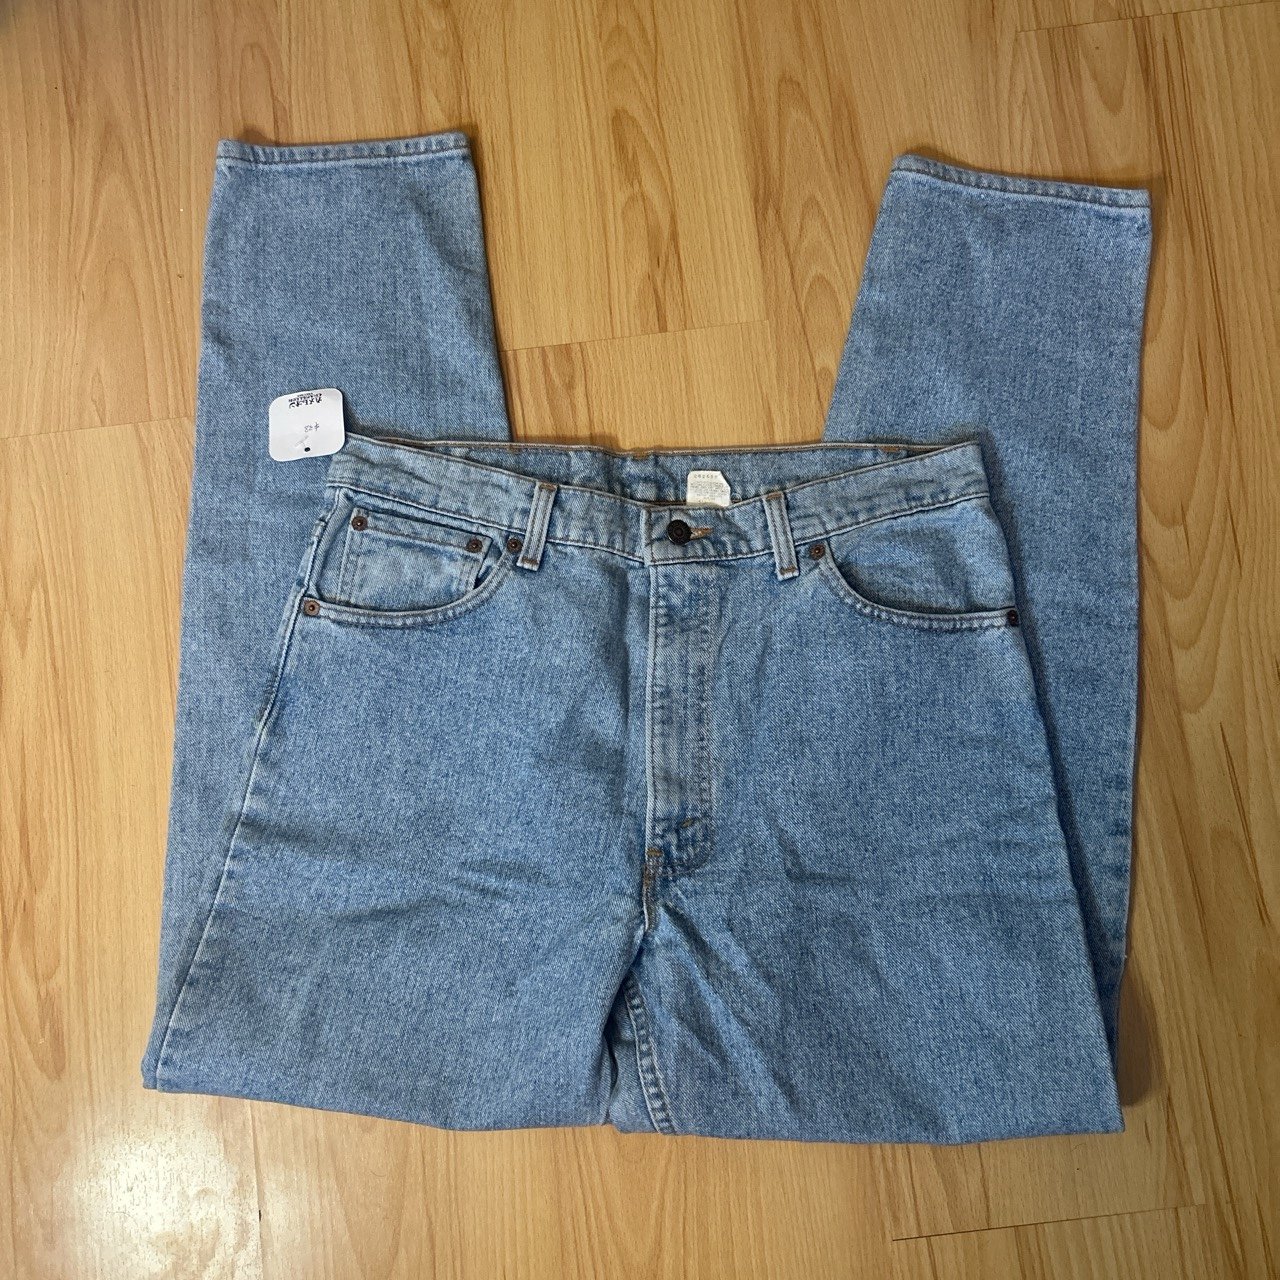 baggy skater jeans 1pm83YWa3